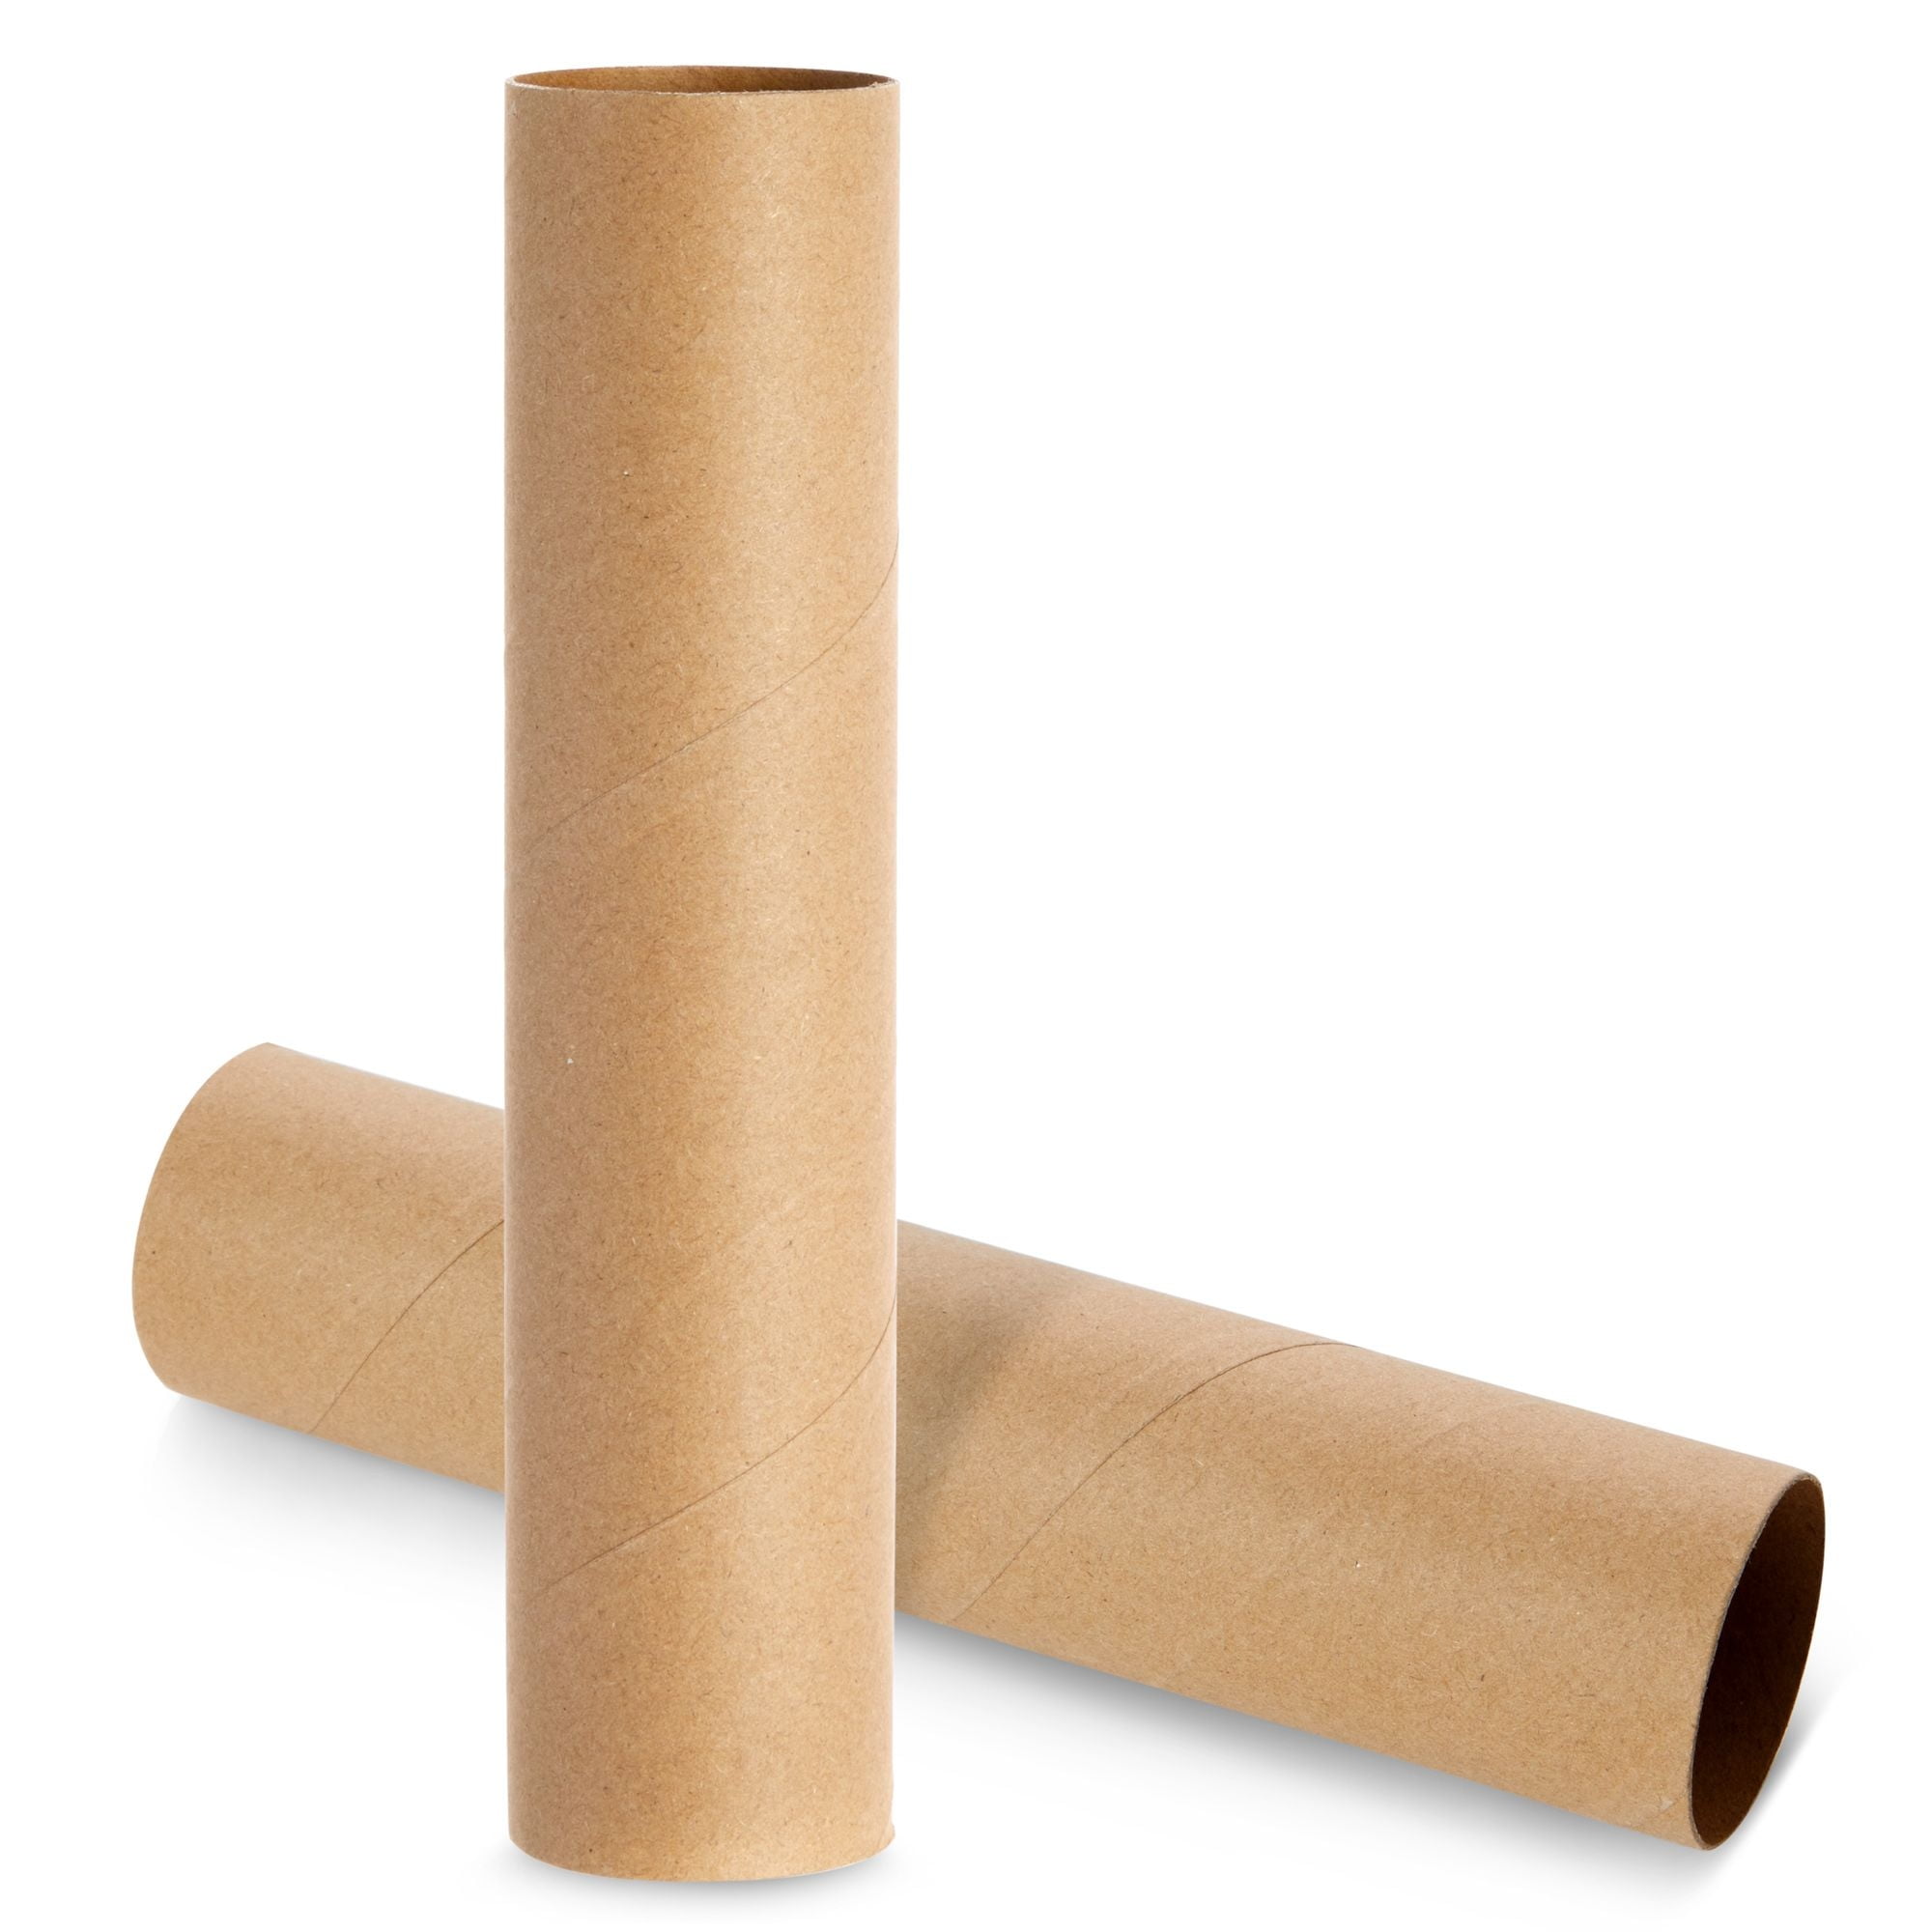  20Pcs Empty Toilet Paper Rolls for Crafts, Brown Cardboard  Tubes for DIY, Classrooms, Dioramas Brown 15cm